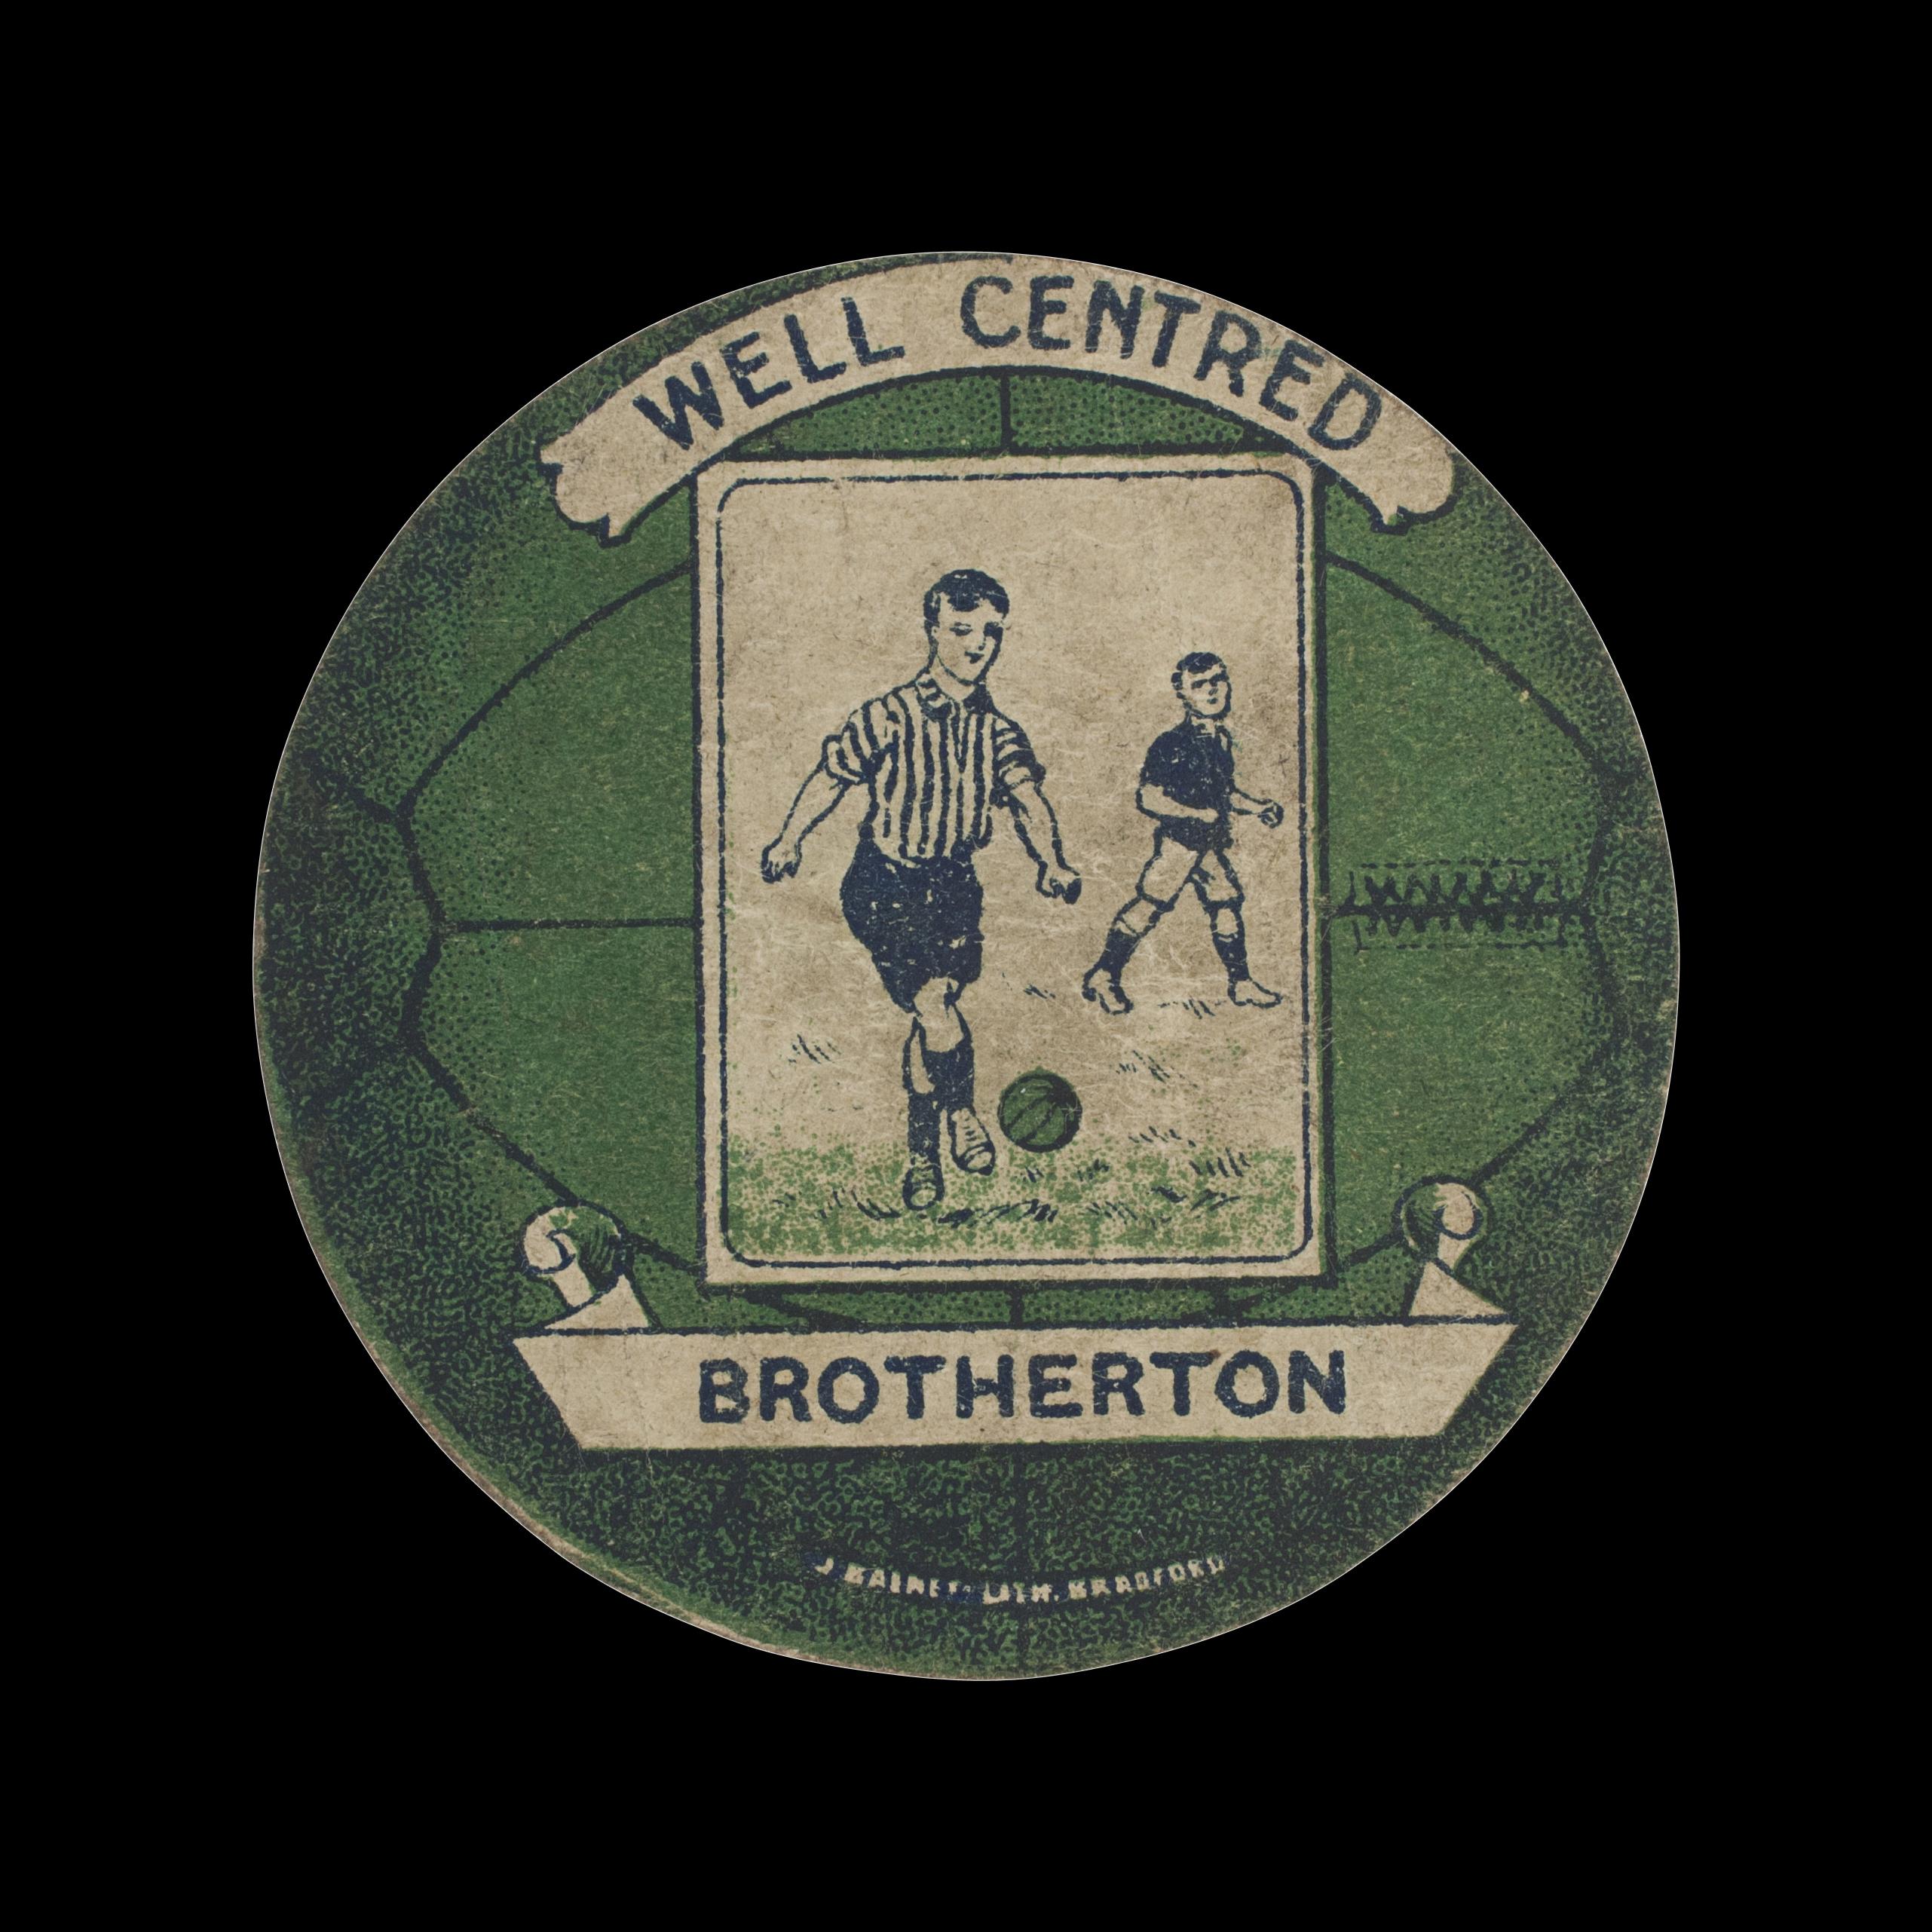 Sporting Art Vintage Baines Football Trade Card, Brotherton, Well Centred For Sale